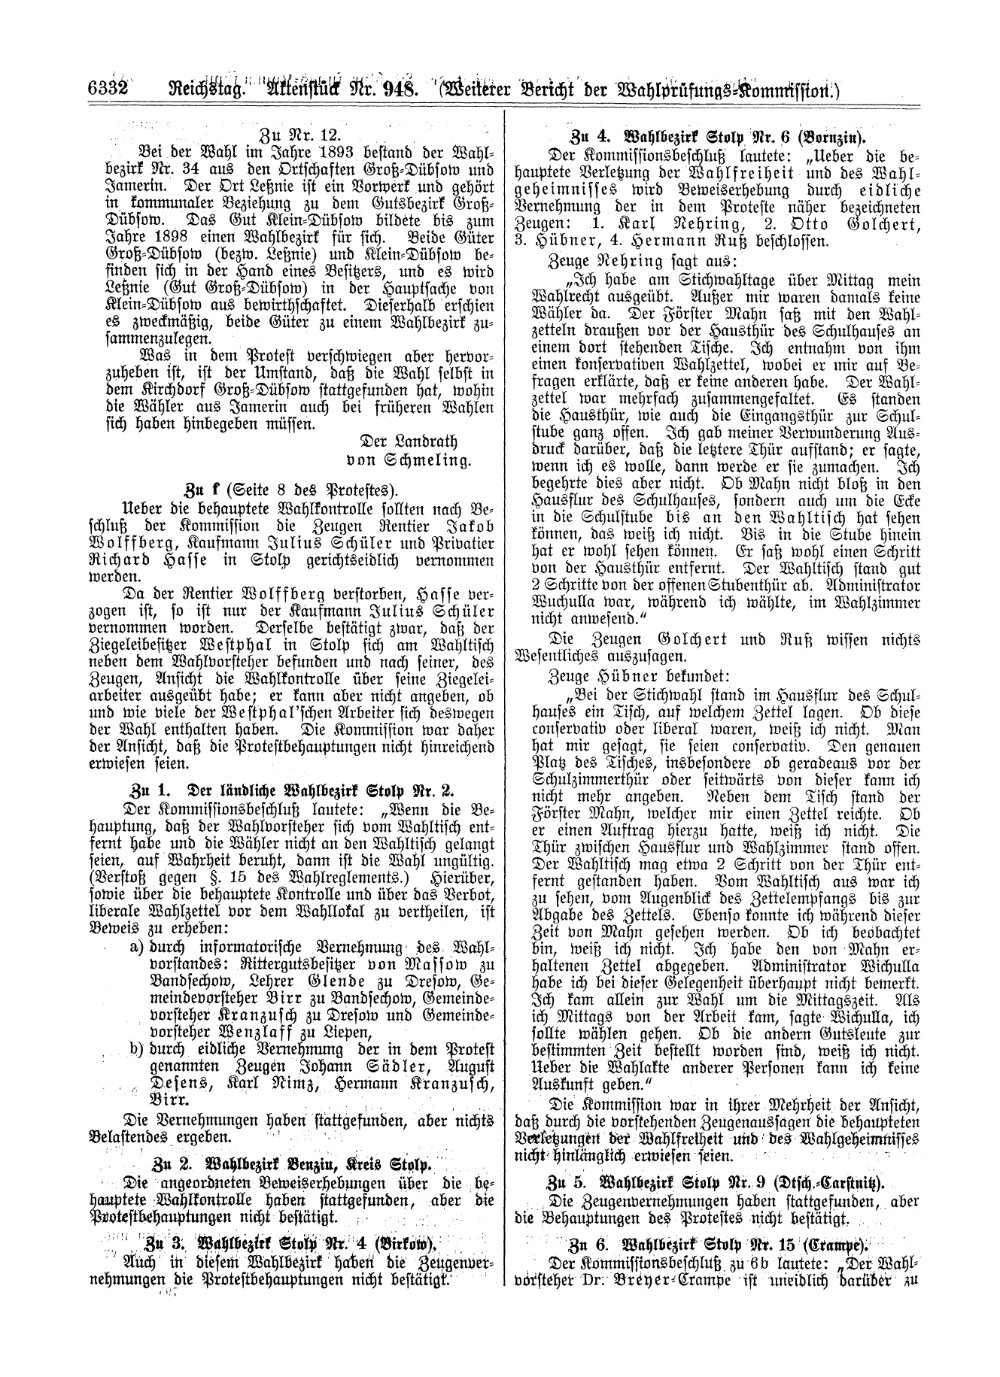 Scan of page 6332